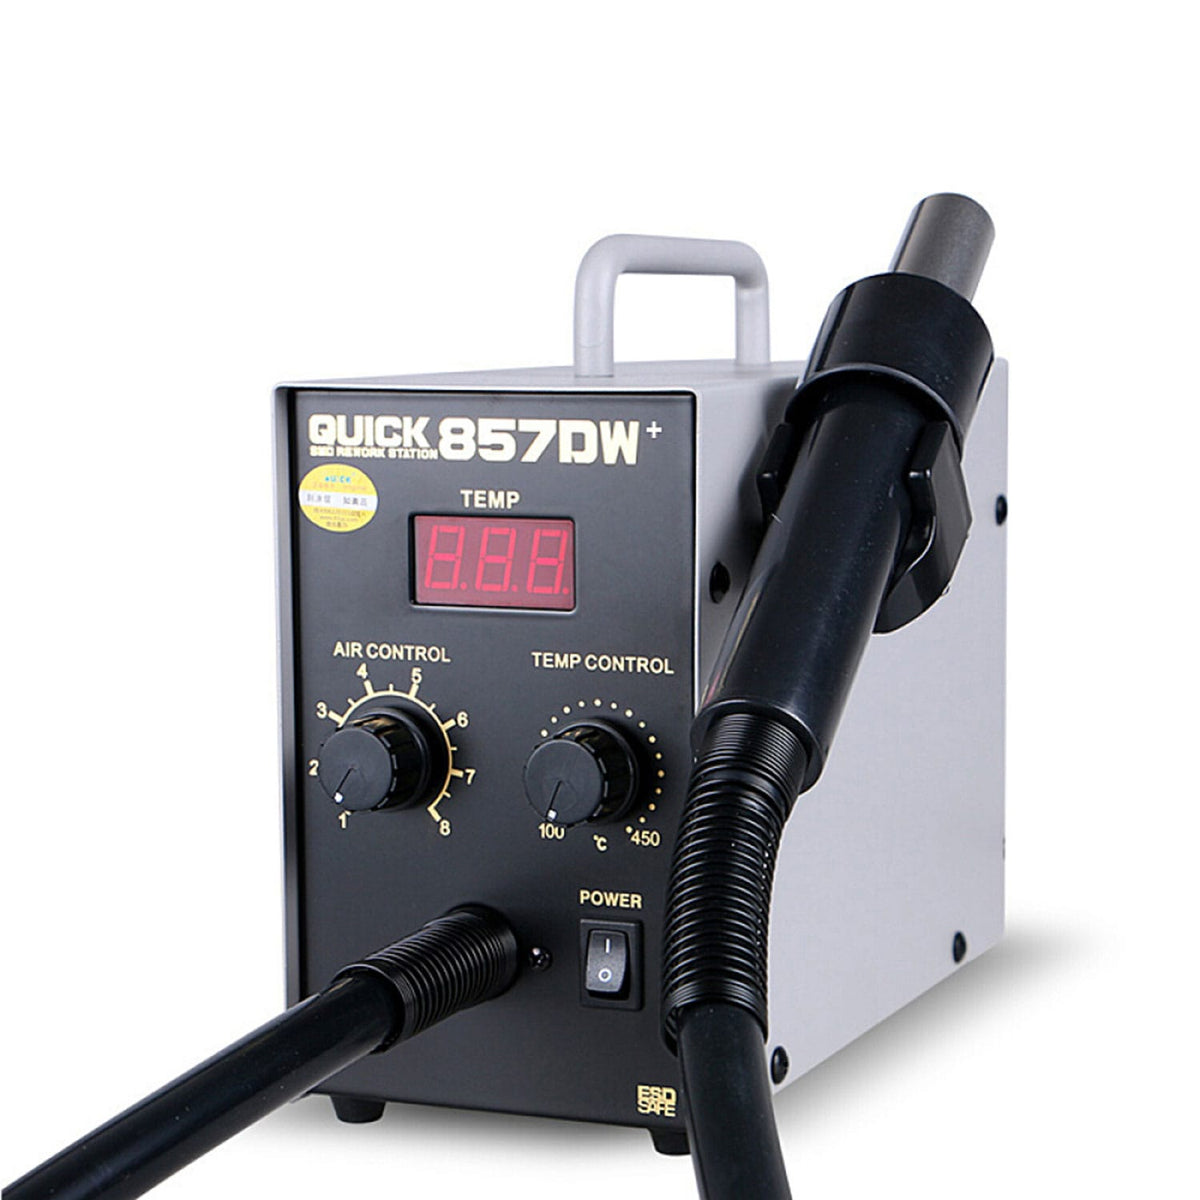 QUICK 857DW+ LEAD FREE ADJUSTABLE HOT AIR HEAT GUN WITH HELICAL WIND REWORK SOLDERING STATION